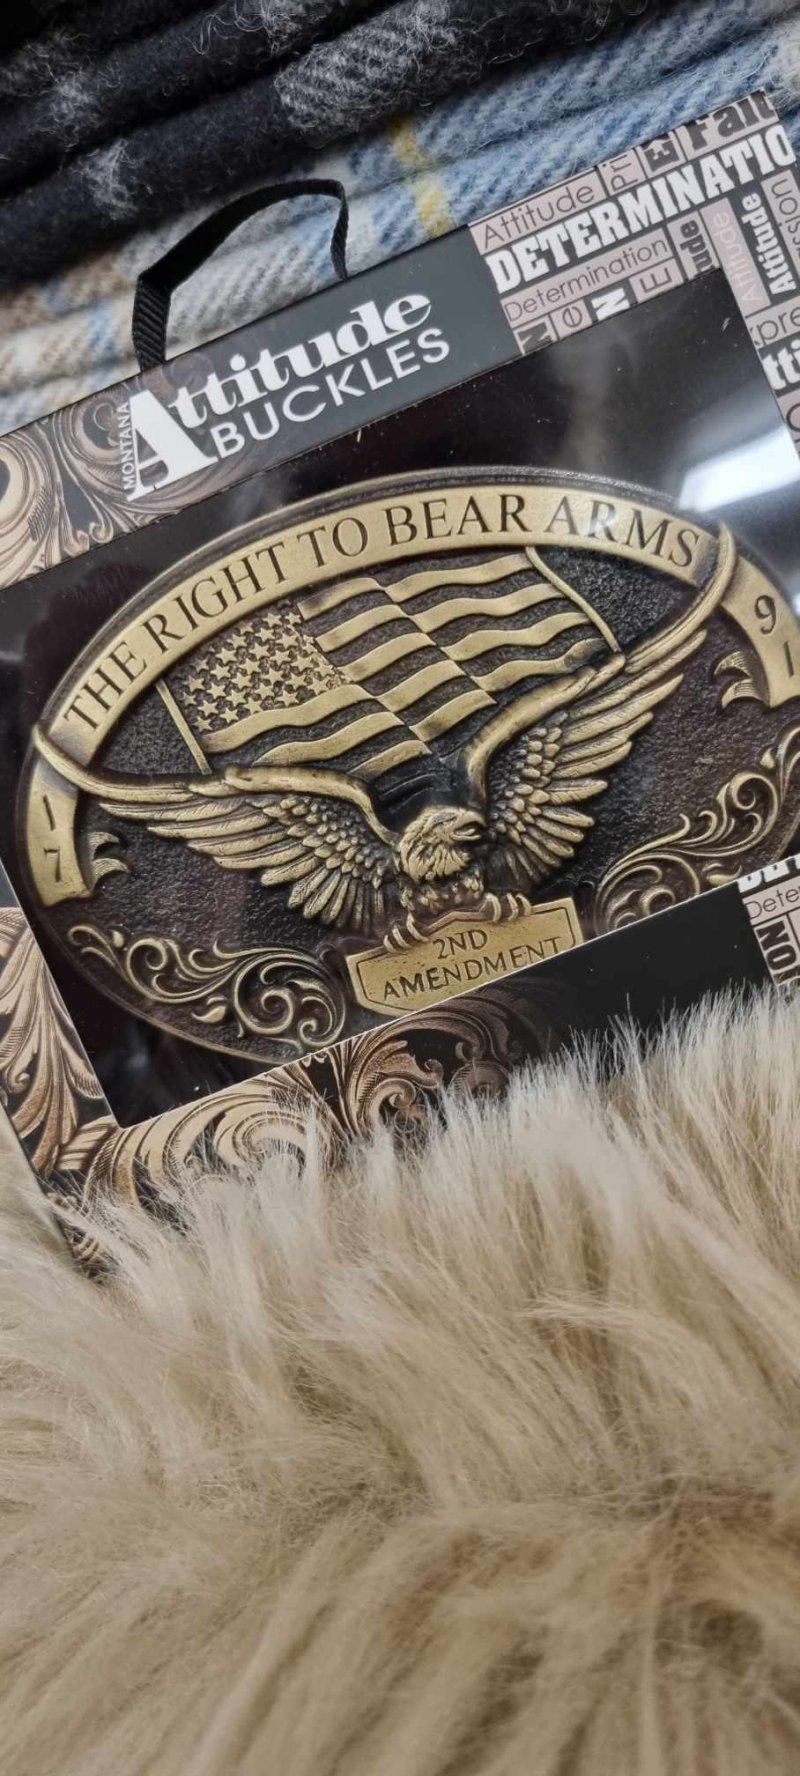 buckle the right to bear arms